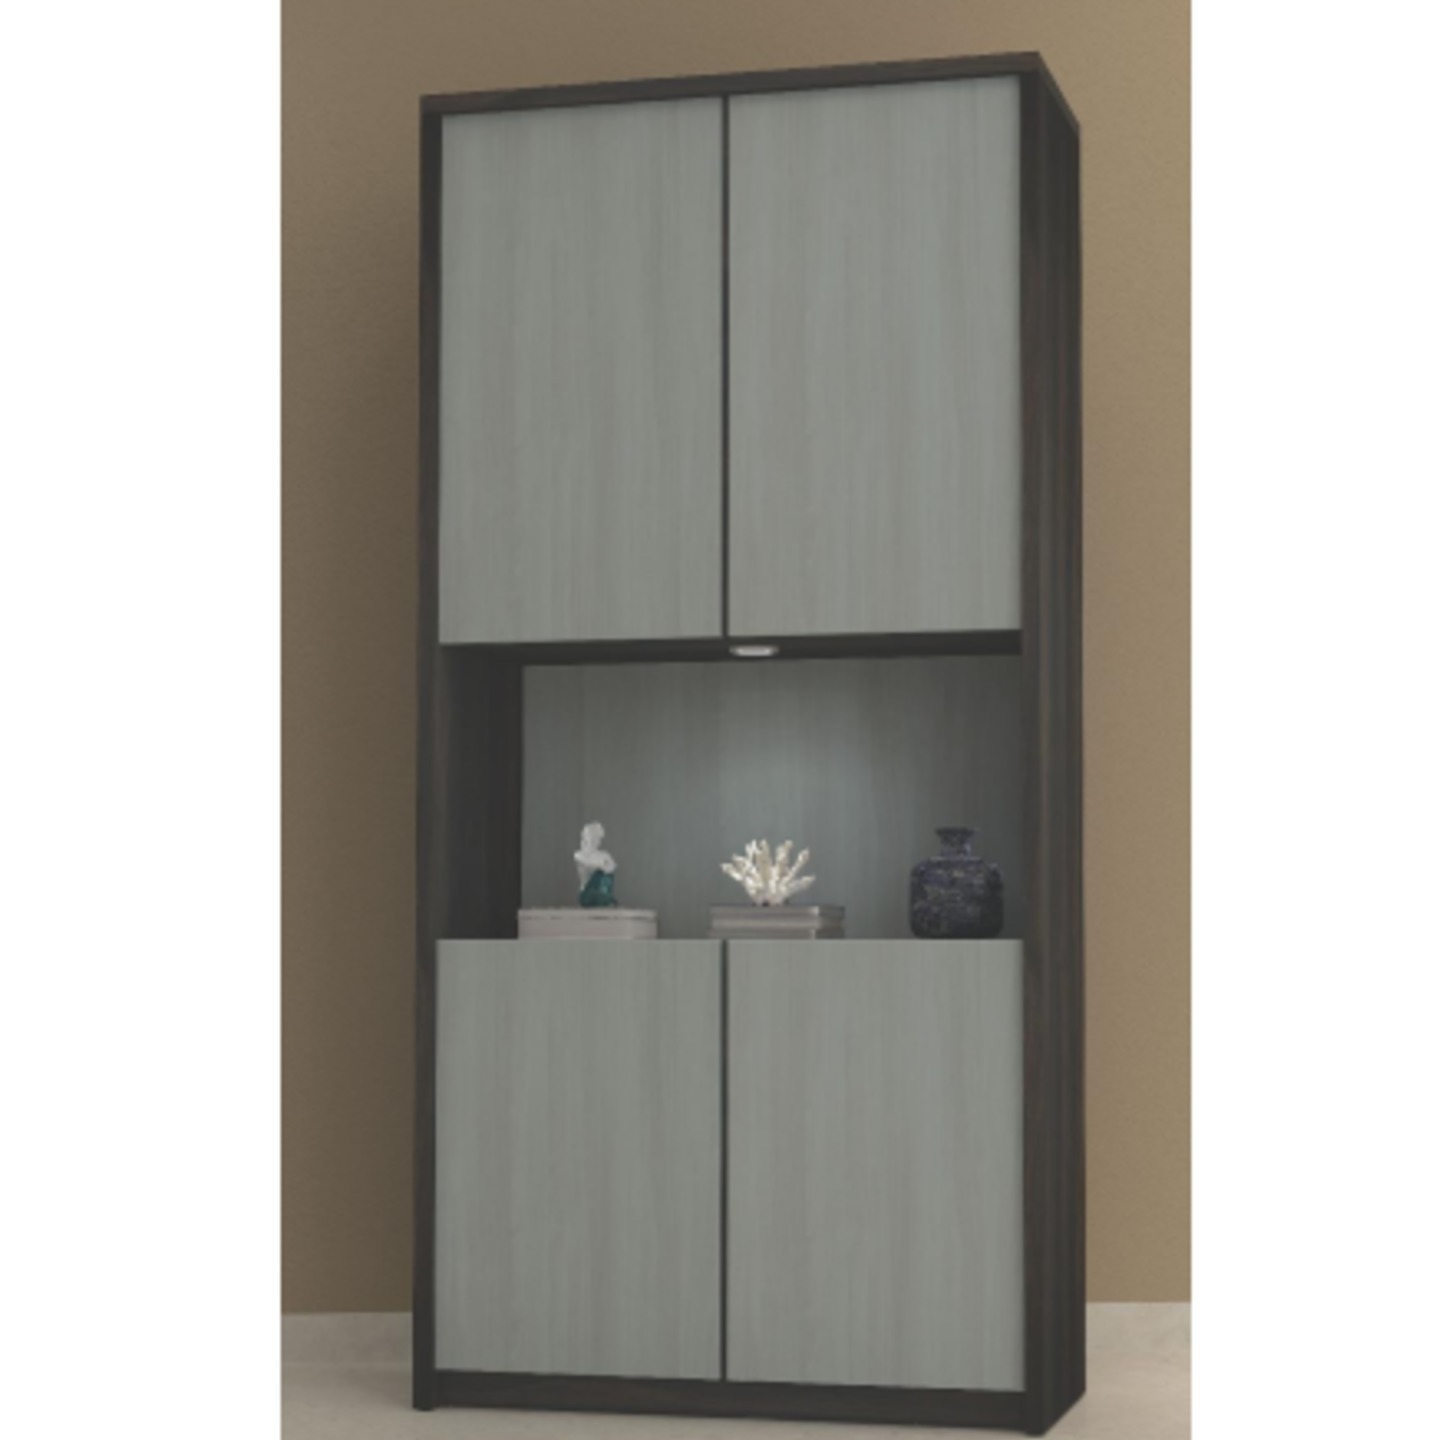 RD Multi Utility Cabinets RD-241 In Grey Colour